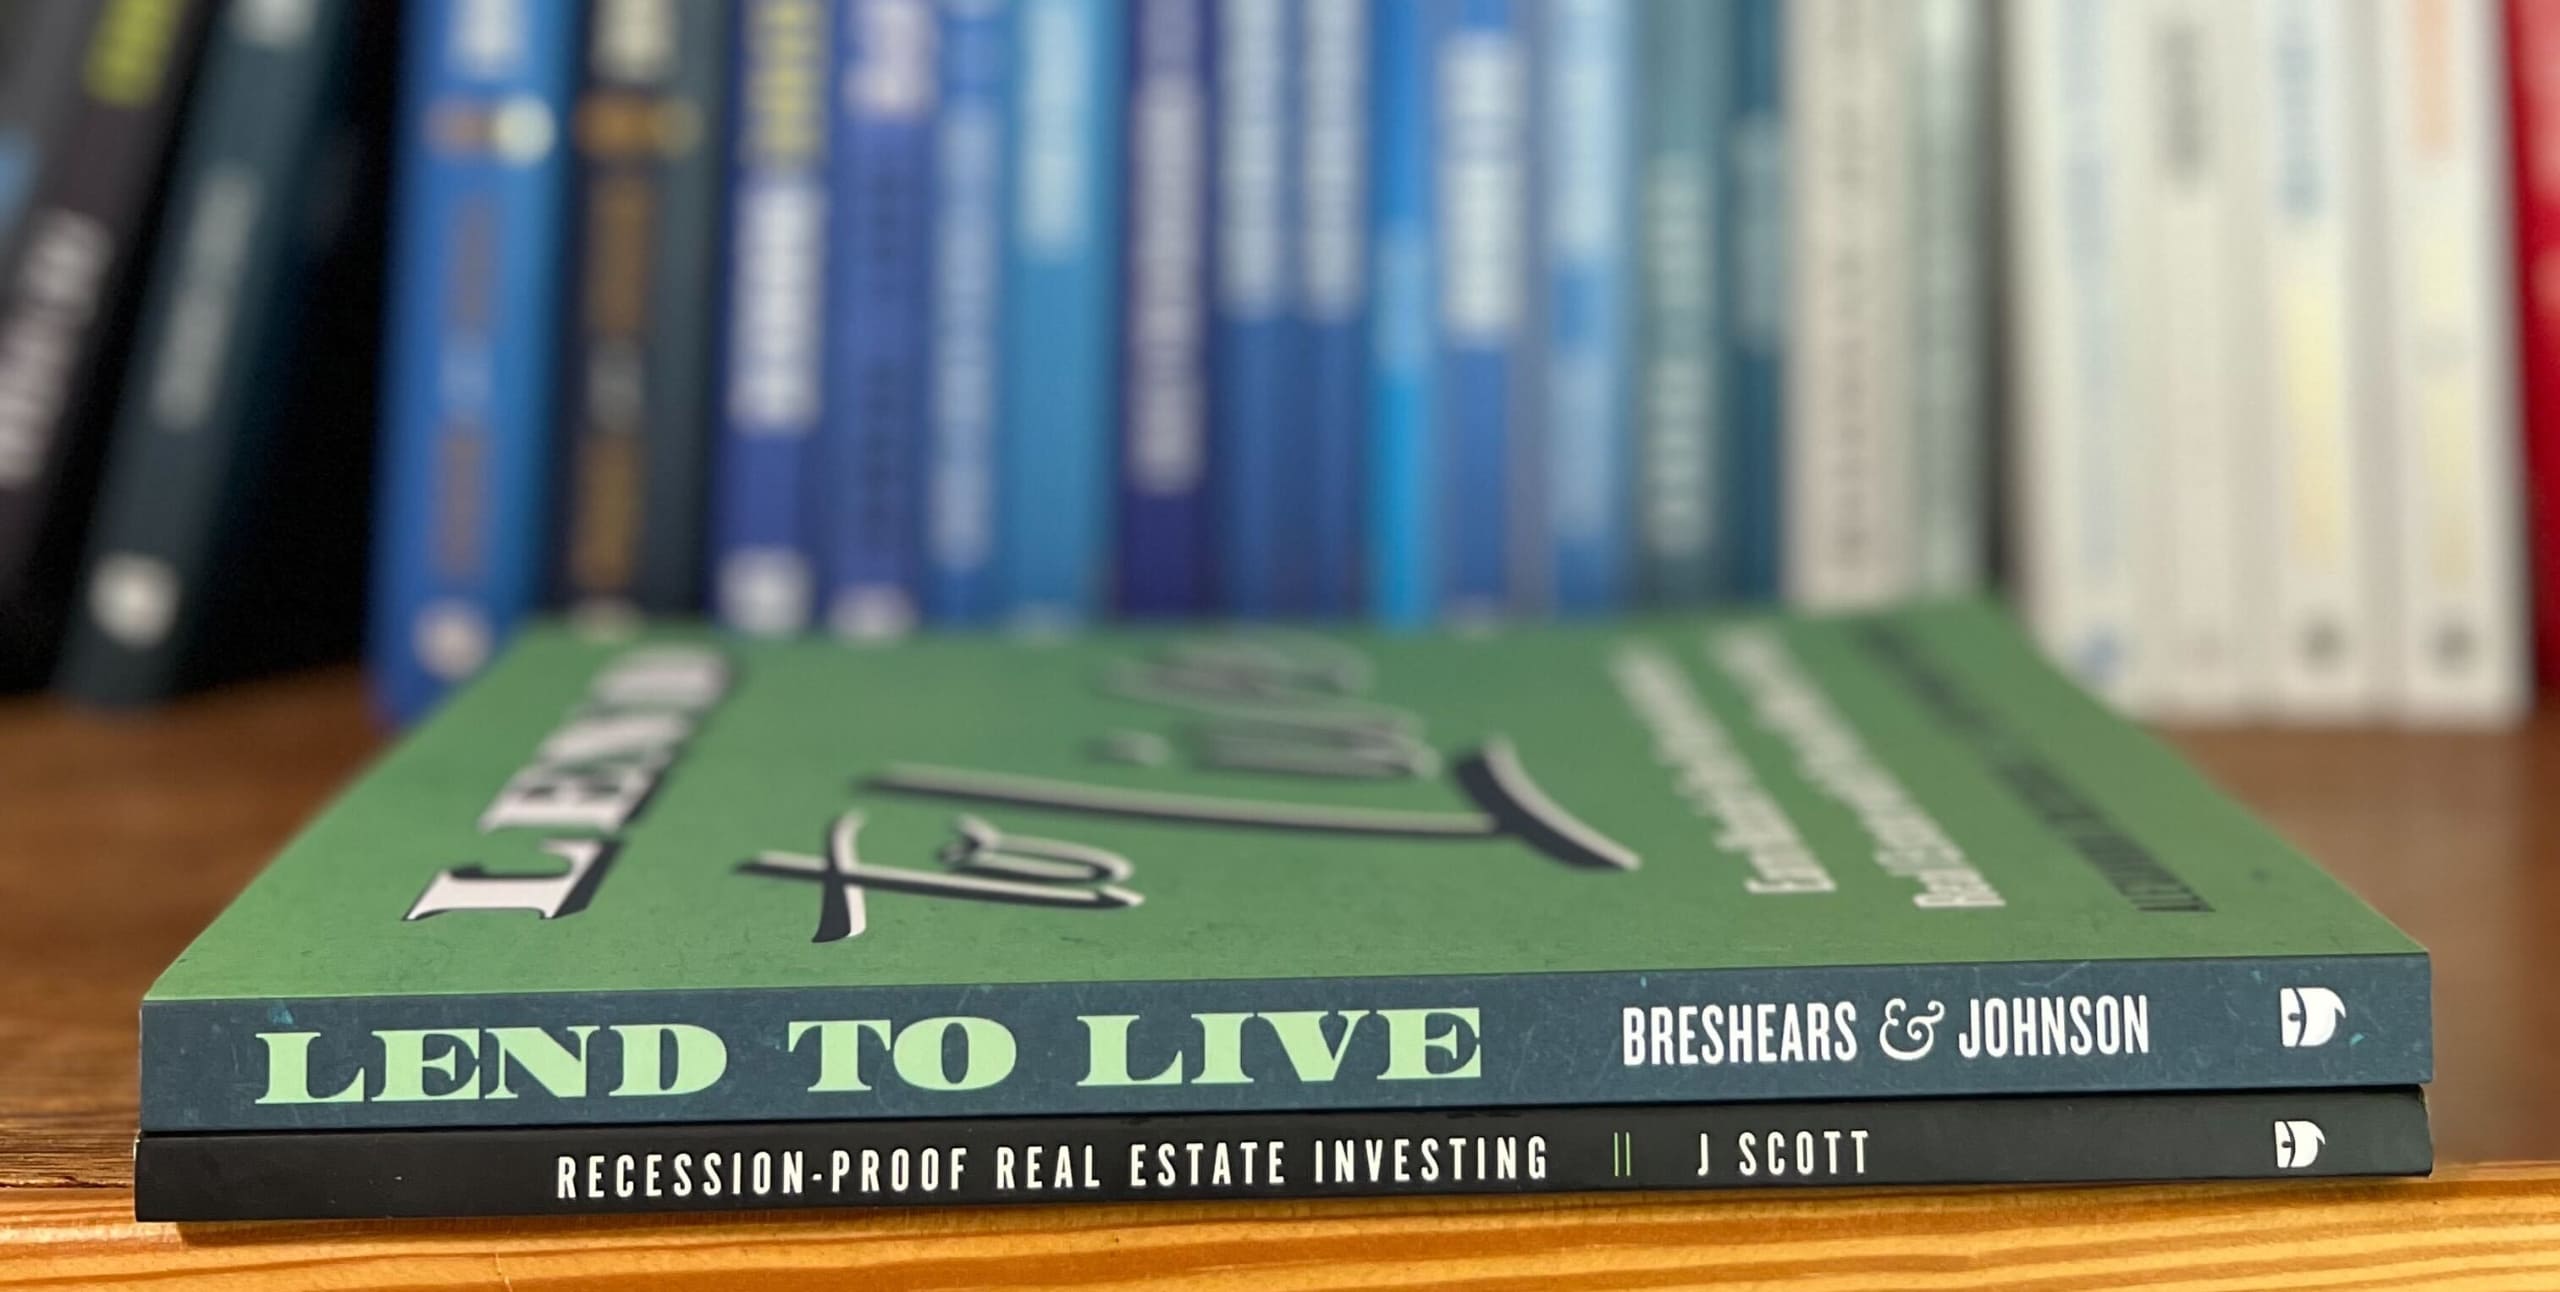 real estate investing books for beginners